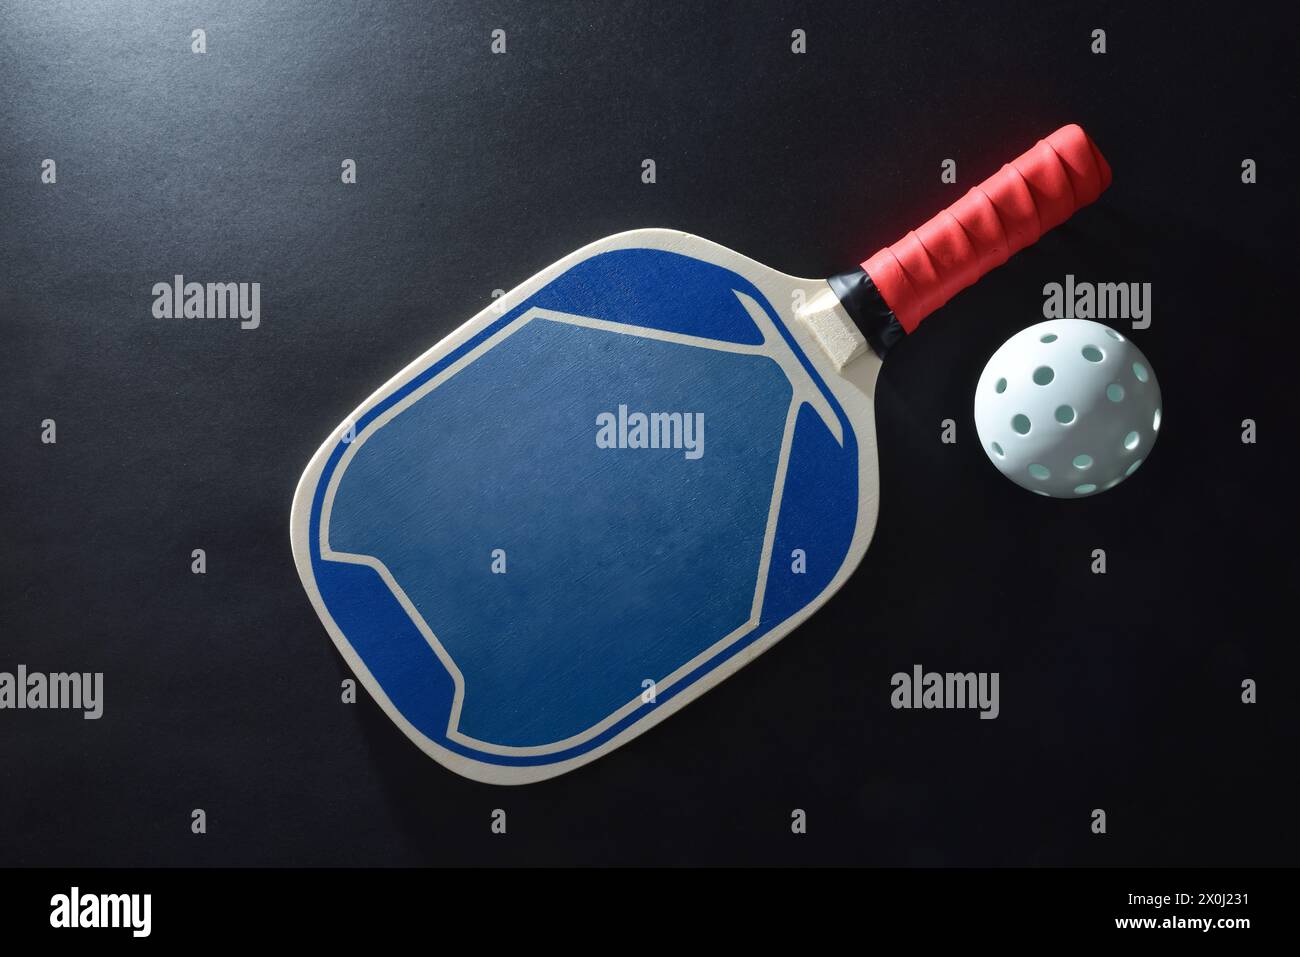 Blue and red wooden paddle pickleball racket and a white ball on black table. Top view. Stock Photo